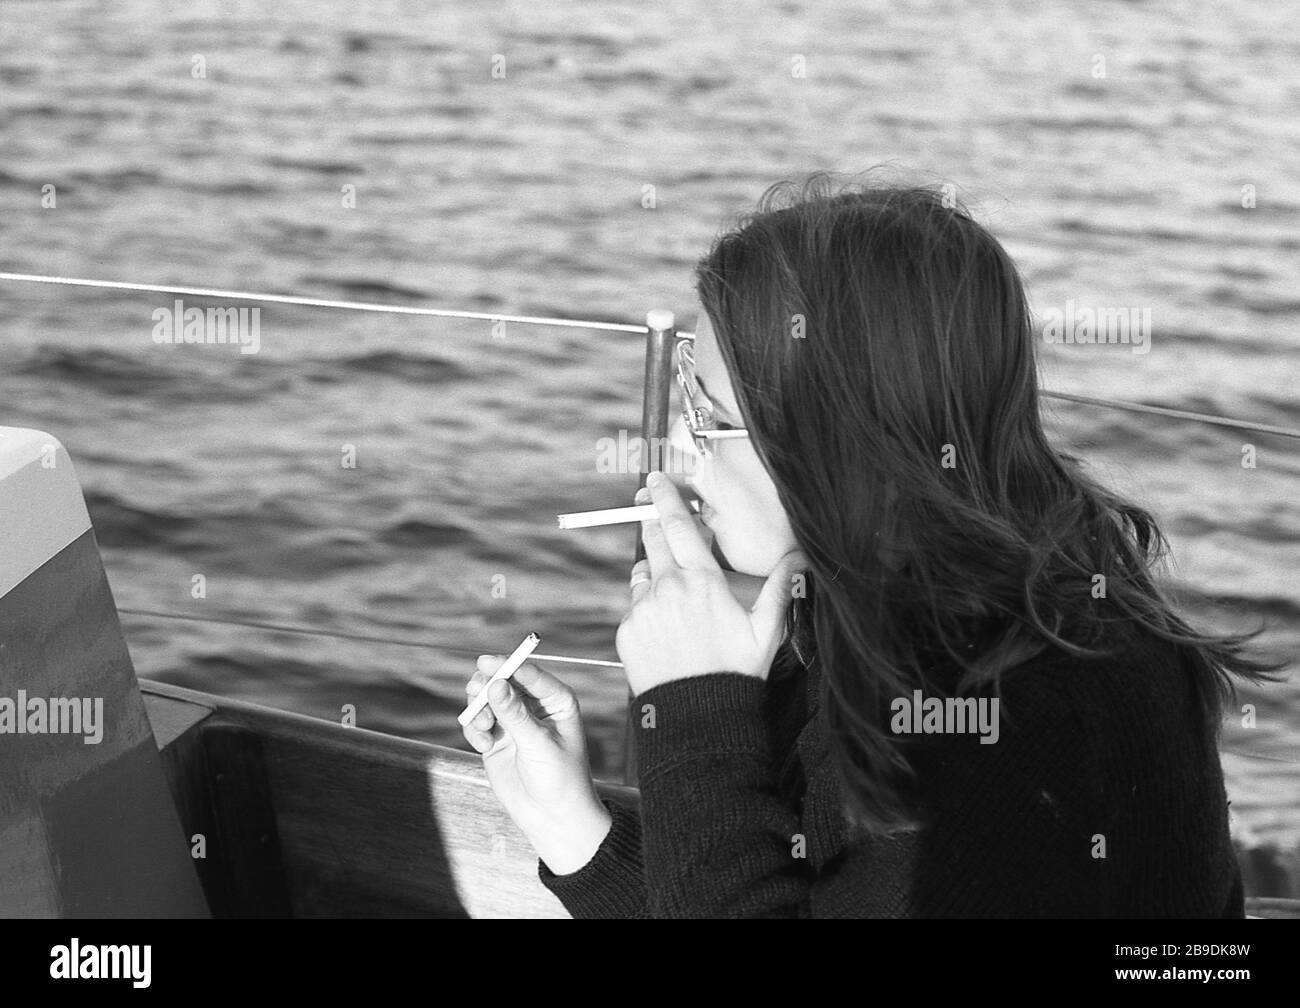 A babe woman lights a cigarette during a boat trip across the Scharmützelsee automated